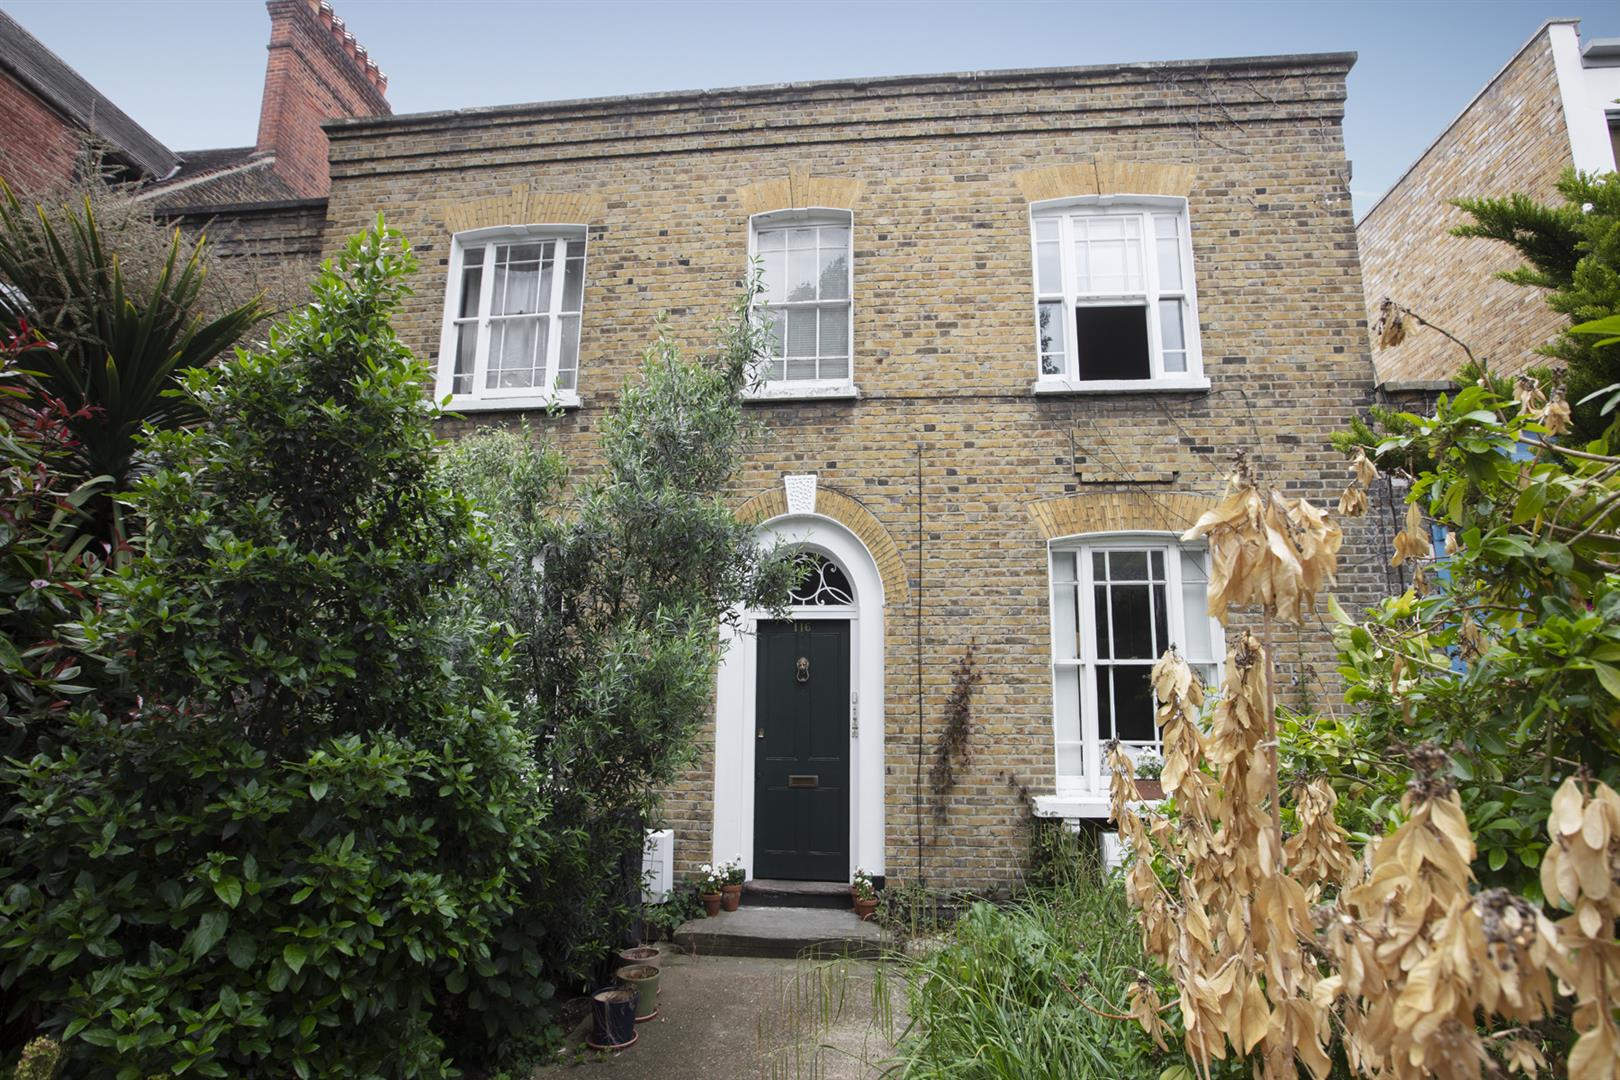 Flat - Conversion Under Offer in Benhill Road, Camberwell, SE5 960 view1